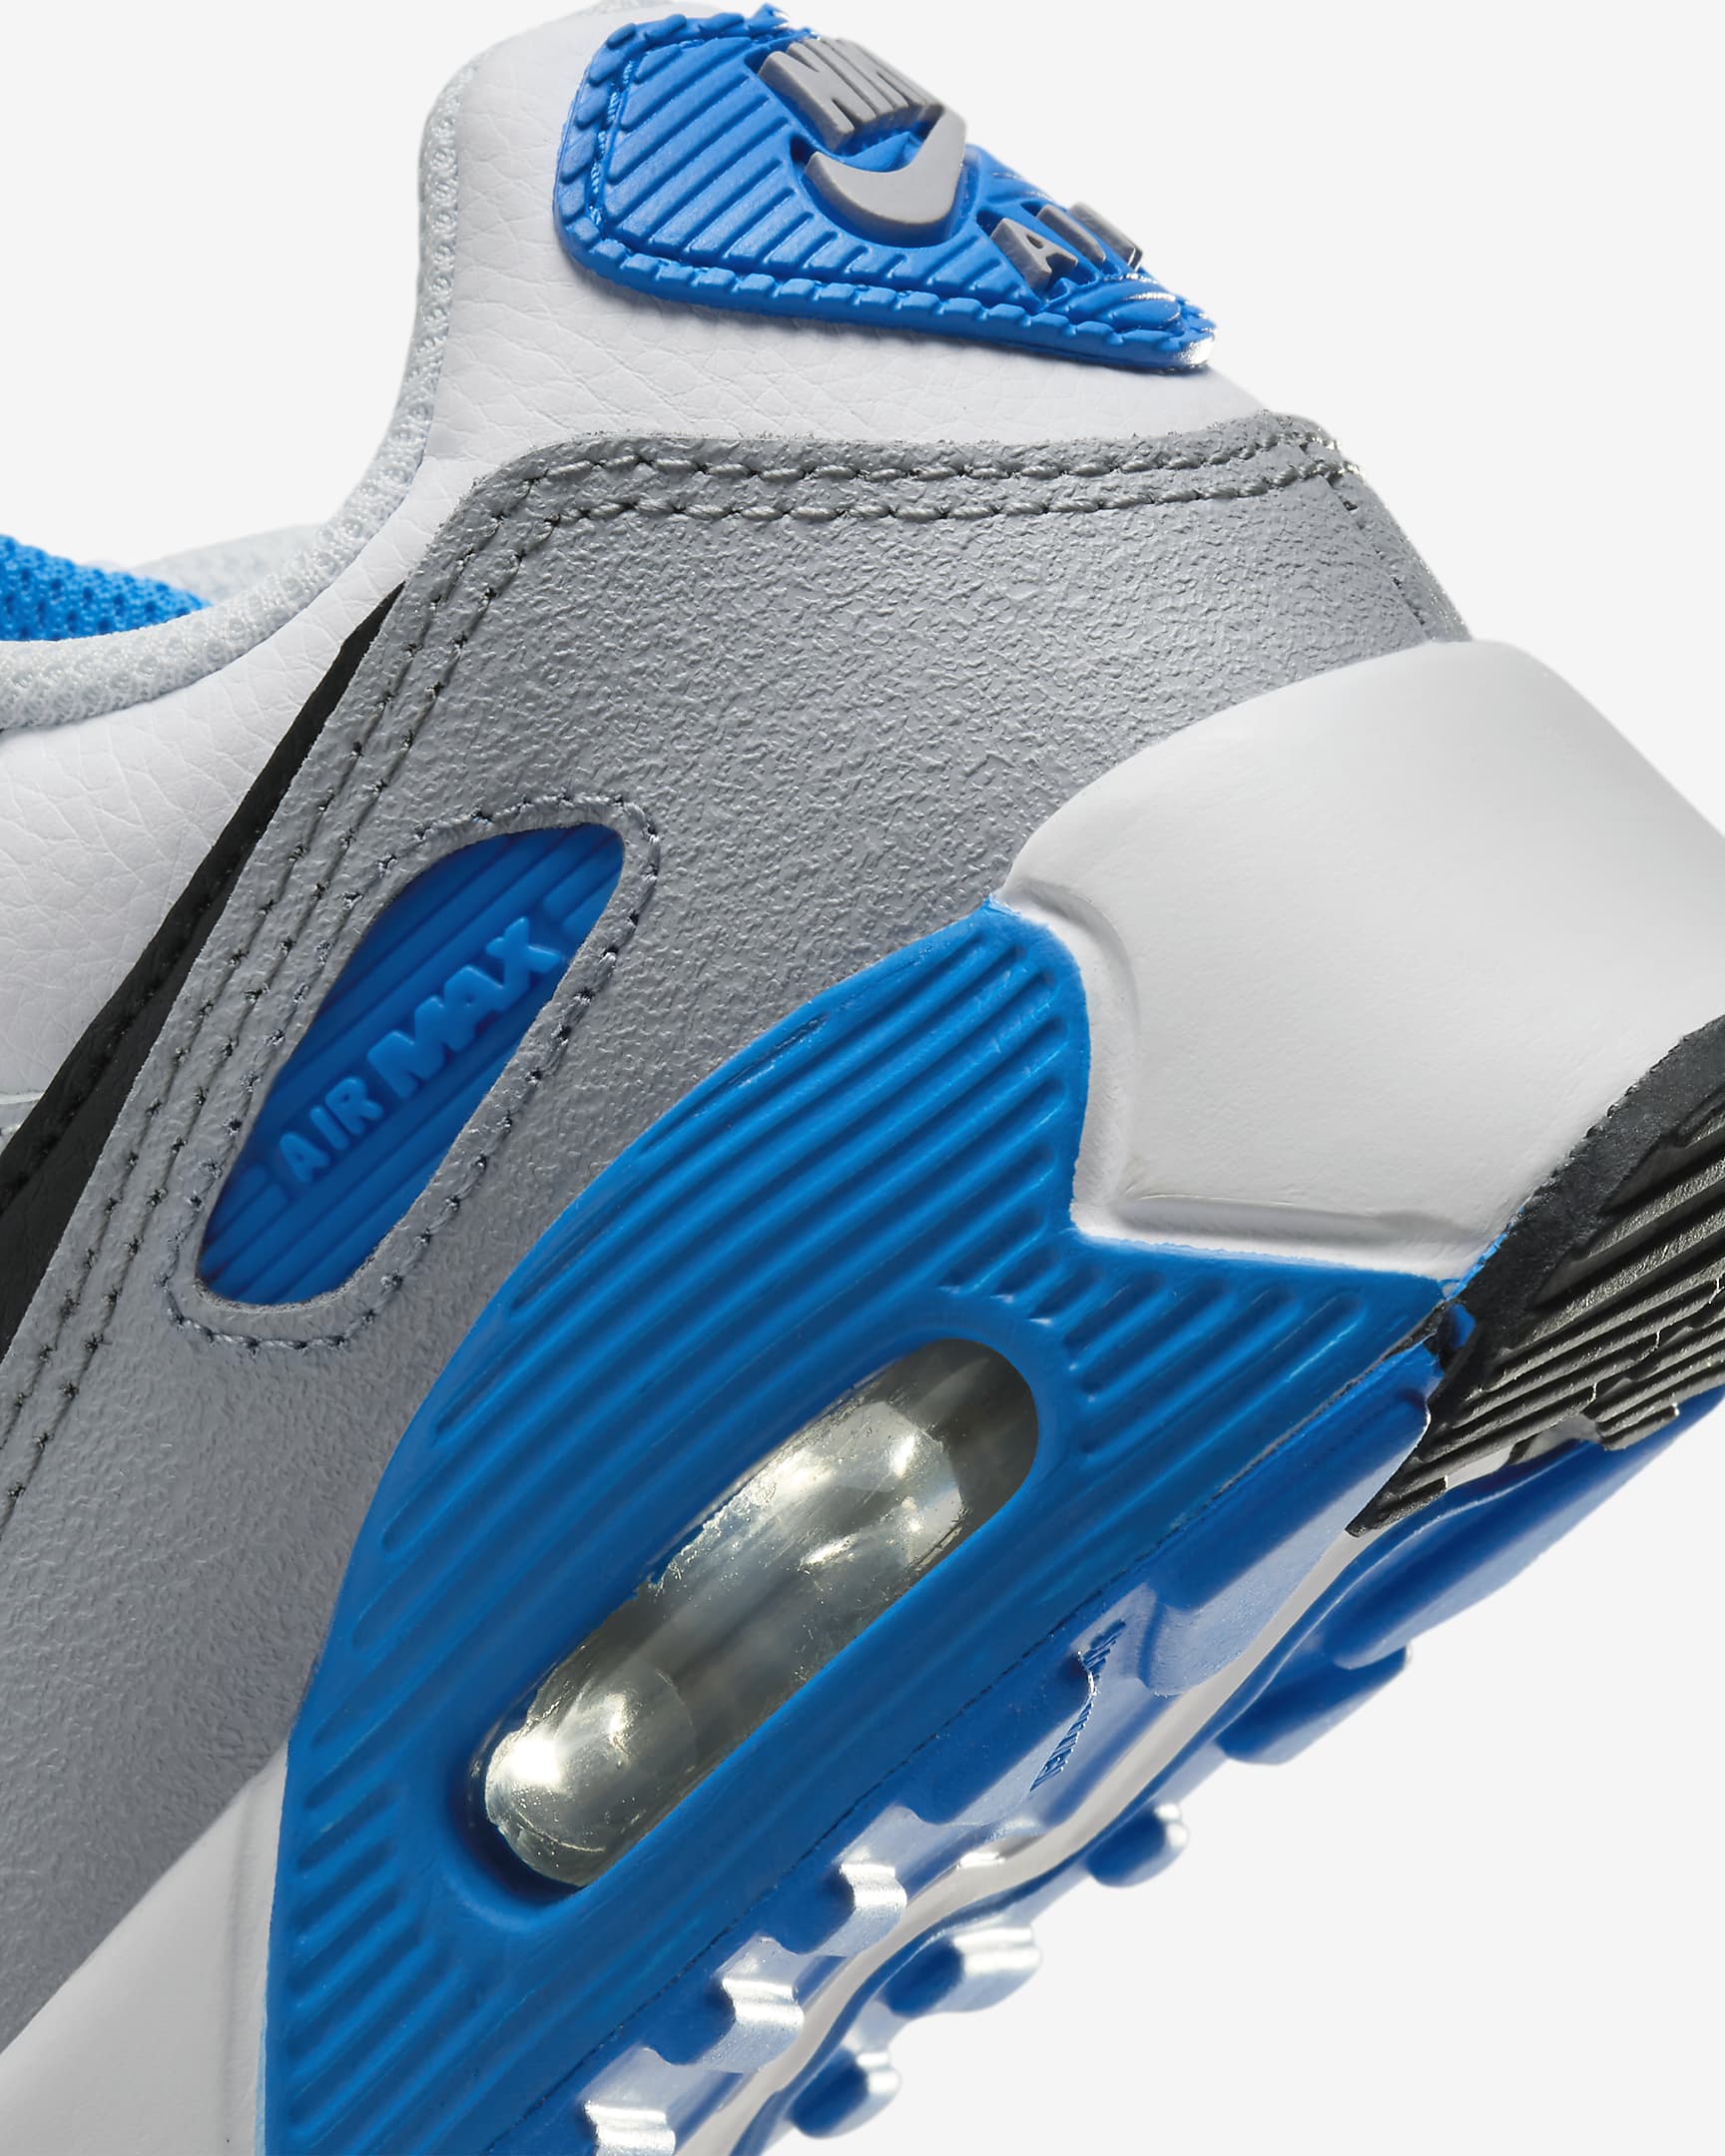 Nike Air Max 90 LTR Younger Kids' Shoes - White/Photo Blue/Pure Platinum/Black